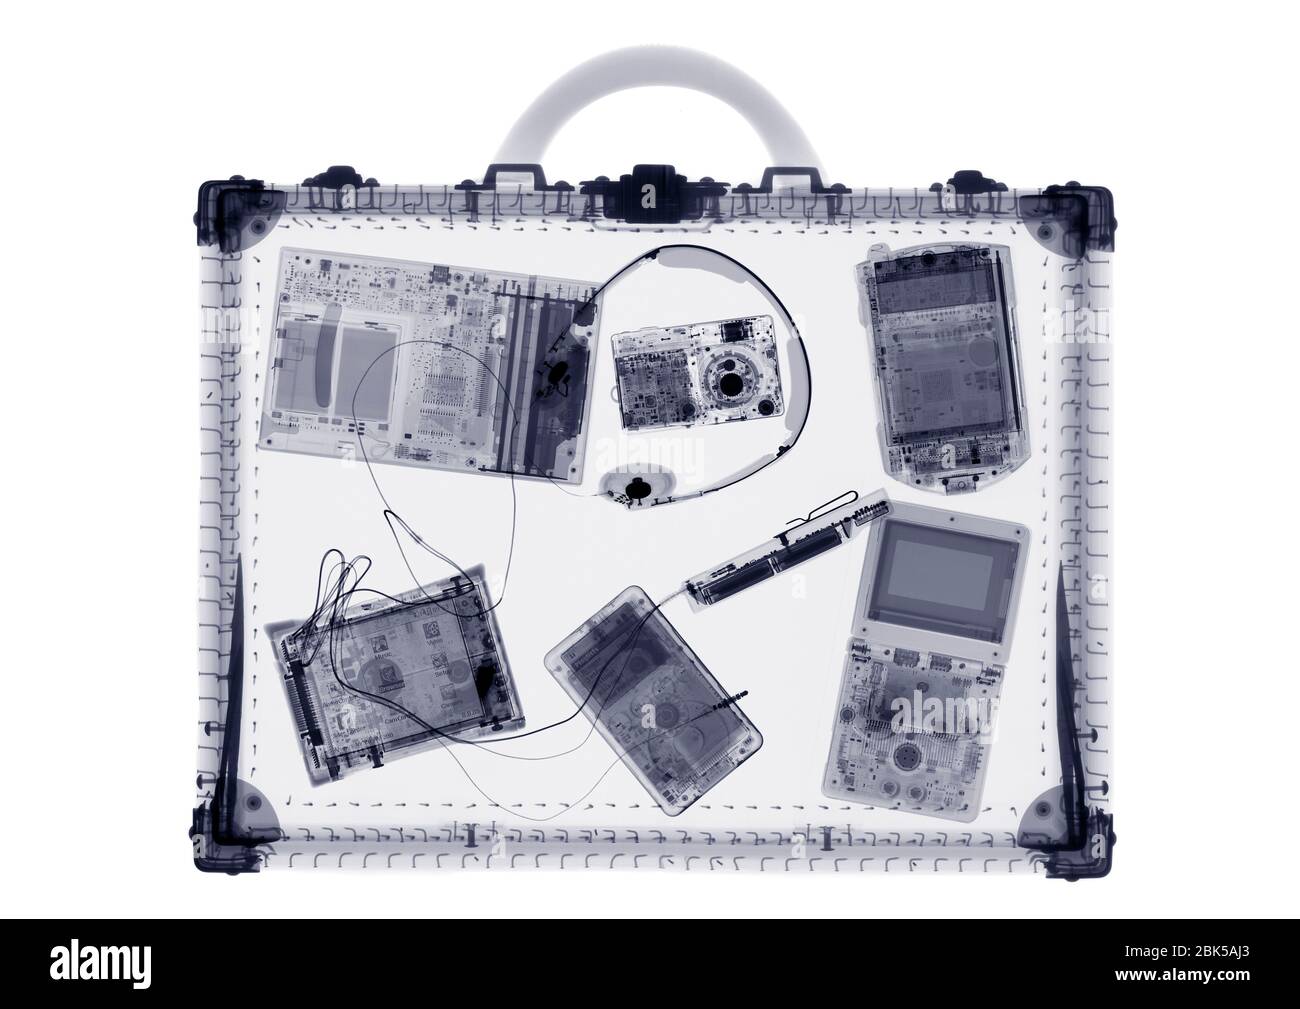 Briefcase and IT accessories, X-ray. Stock Photo